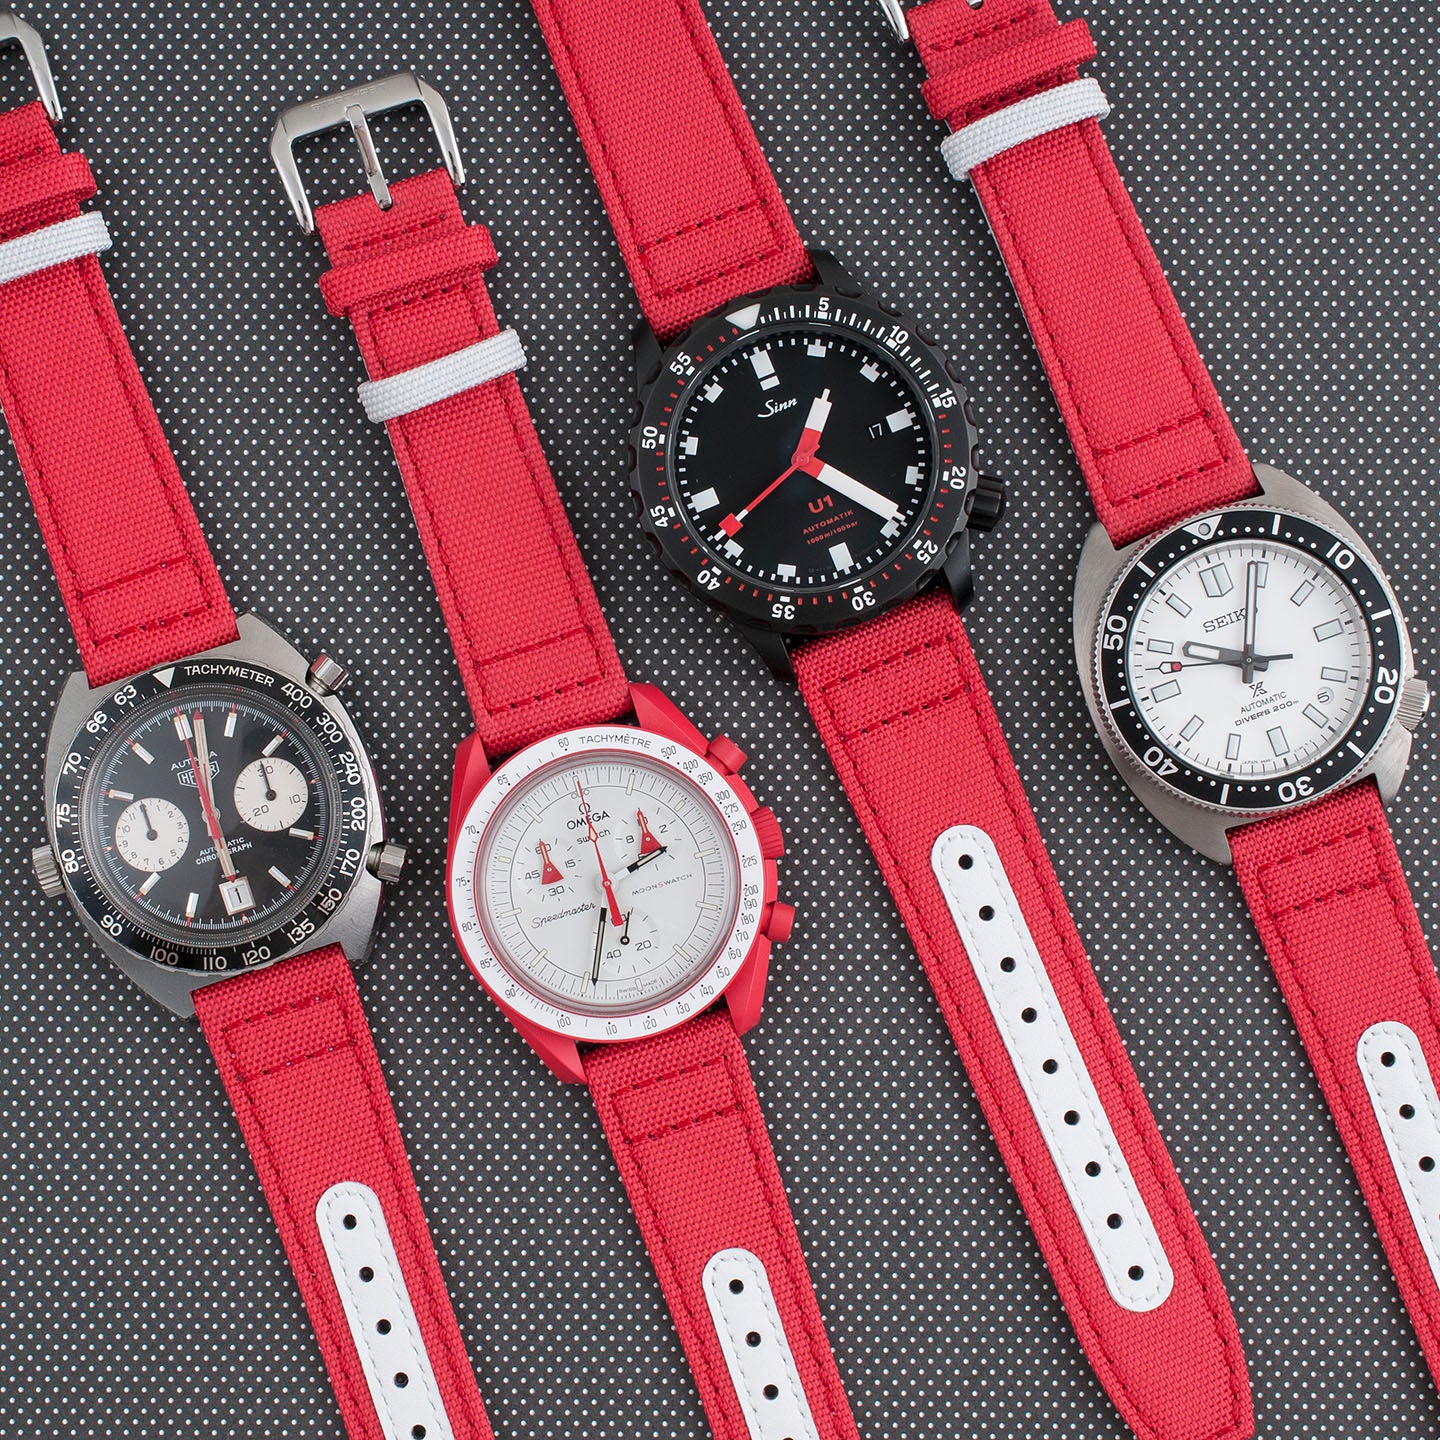 Premium Sailcloth Colorway Quick Release Watch Strap band replacement 19mm, 20mm, 21mm, 22mm for large wrists and small wrists, for men and women, unisex white bright red Crimson Heuer Autavia Viceroy 1163v sinn U1 S seiko spb313 omega swatch Moonswatch mission to Mars Speedmaster 